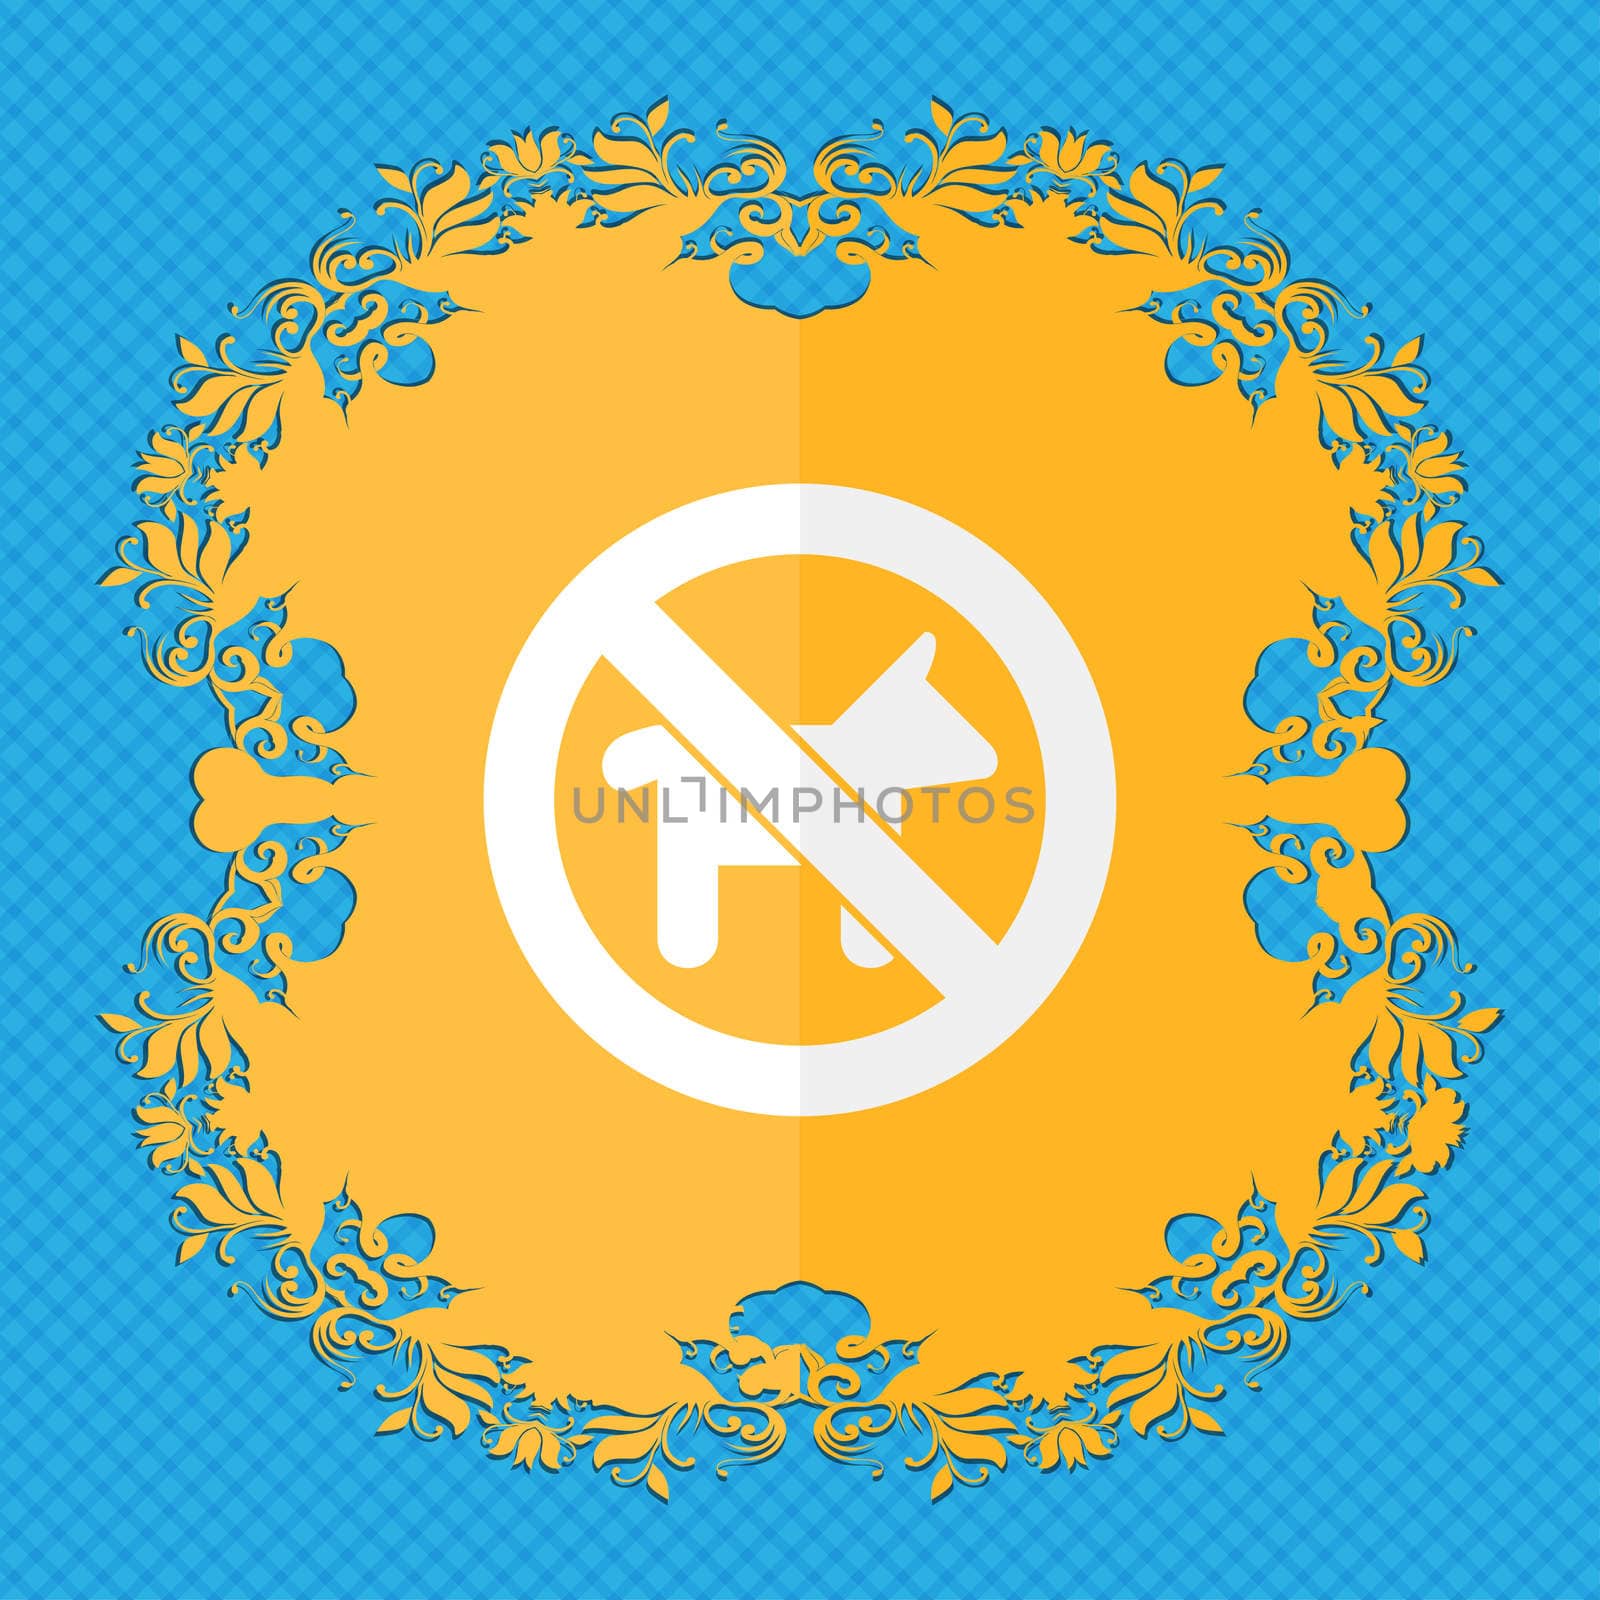 dog walking is prohibited. Floral flat design on a blue abstract background with place for your text.  by serhii_lohvyniuk